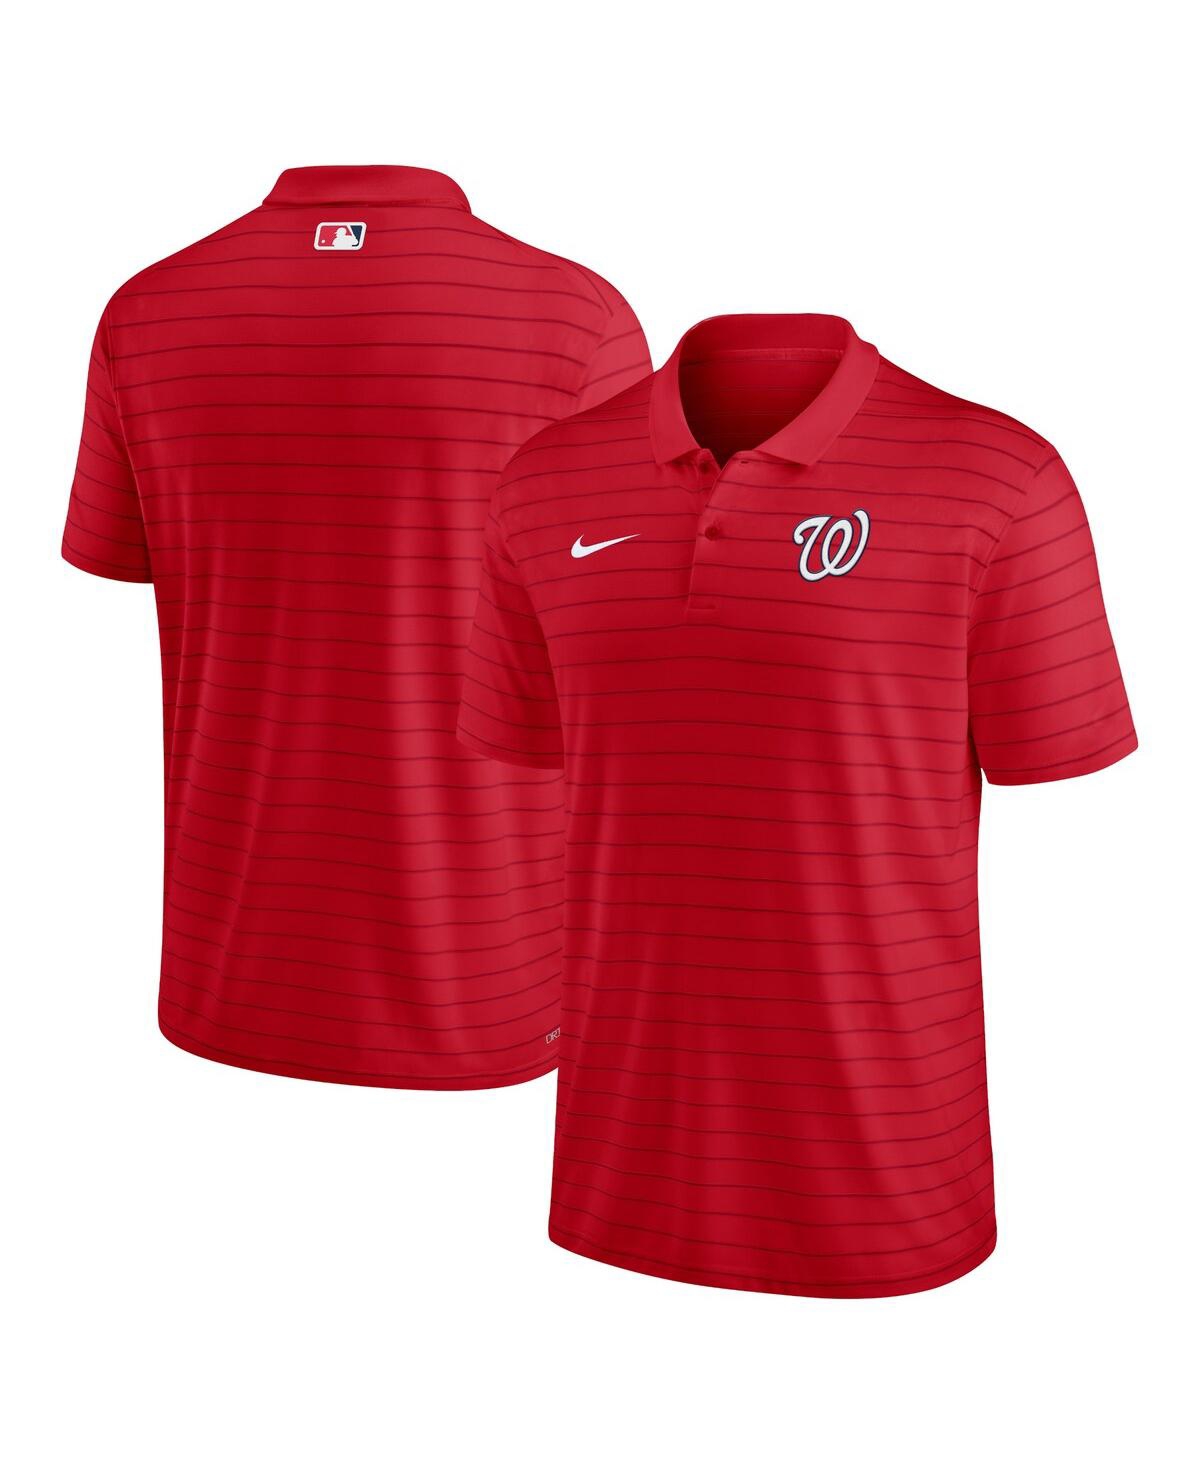 Men's Nike Red Washington Nationals Authentic Collection Victory Striped Performance Polo Shirt - Red